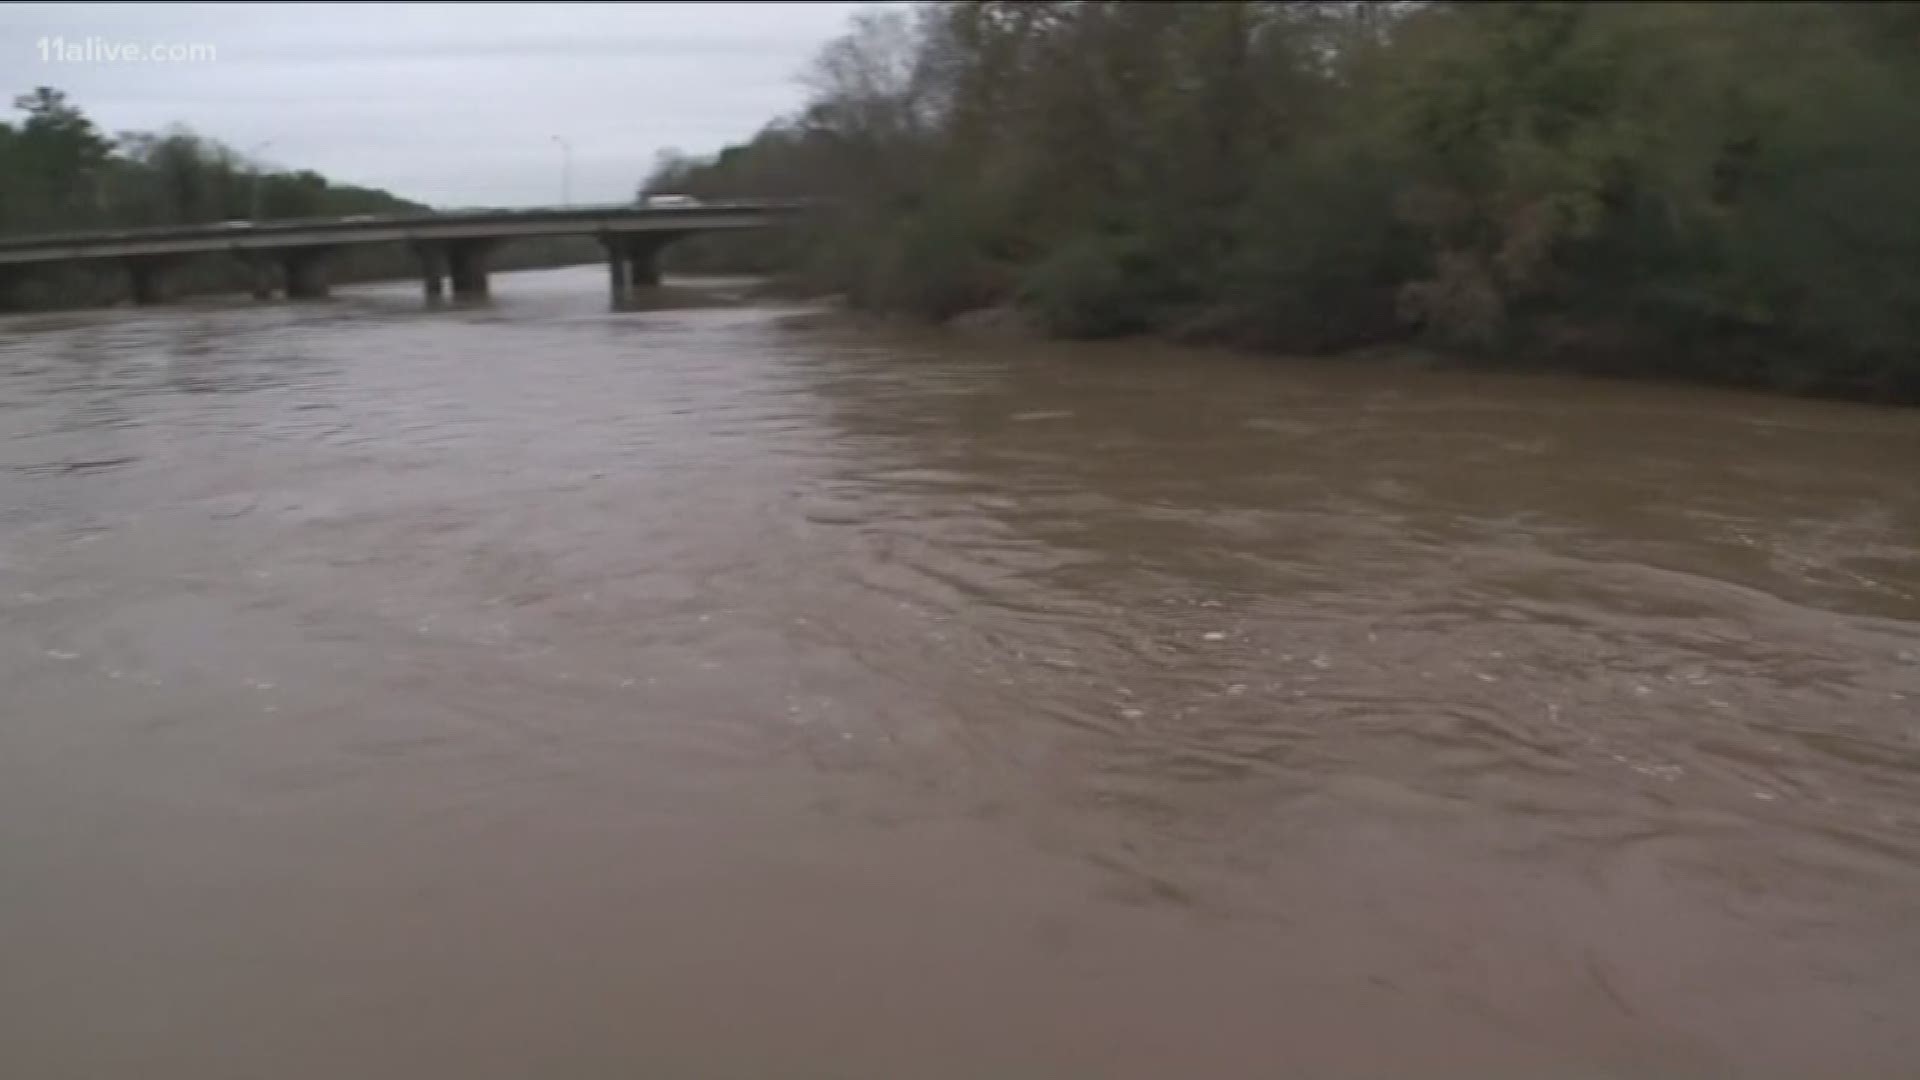 Big Creek, which rushes into the Chattahoochee River near Roswell, is rising as rain continues to fall. The river is expected to crest by Friday.